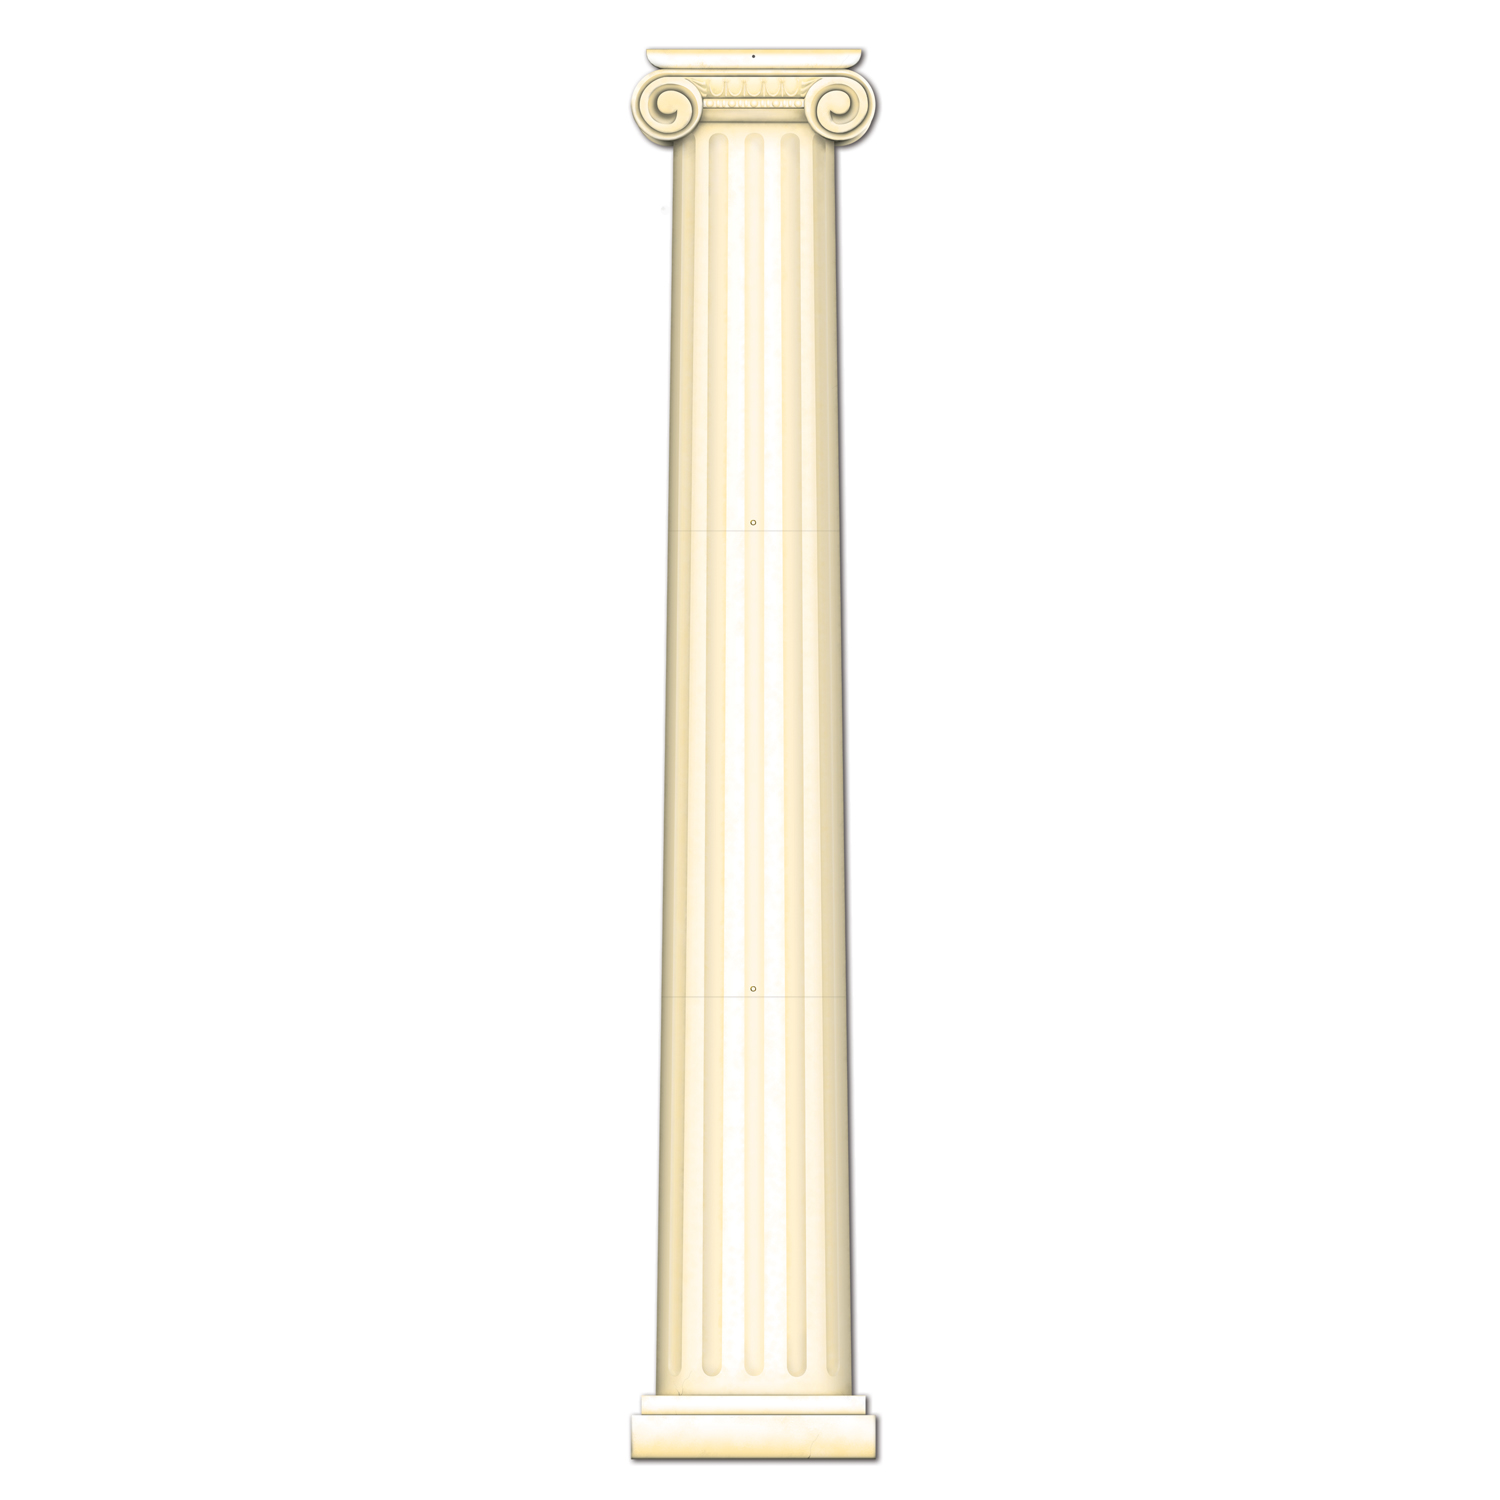 12 Pieces of Jointed Column PulL-Down Cutout Prtd 2 Sides